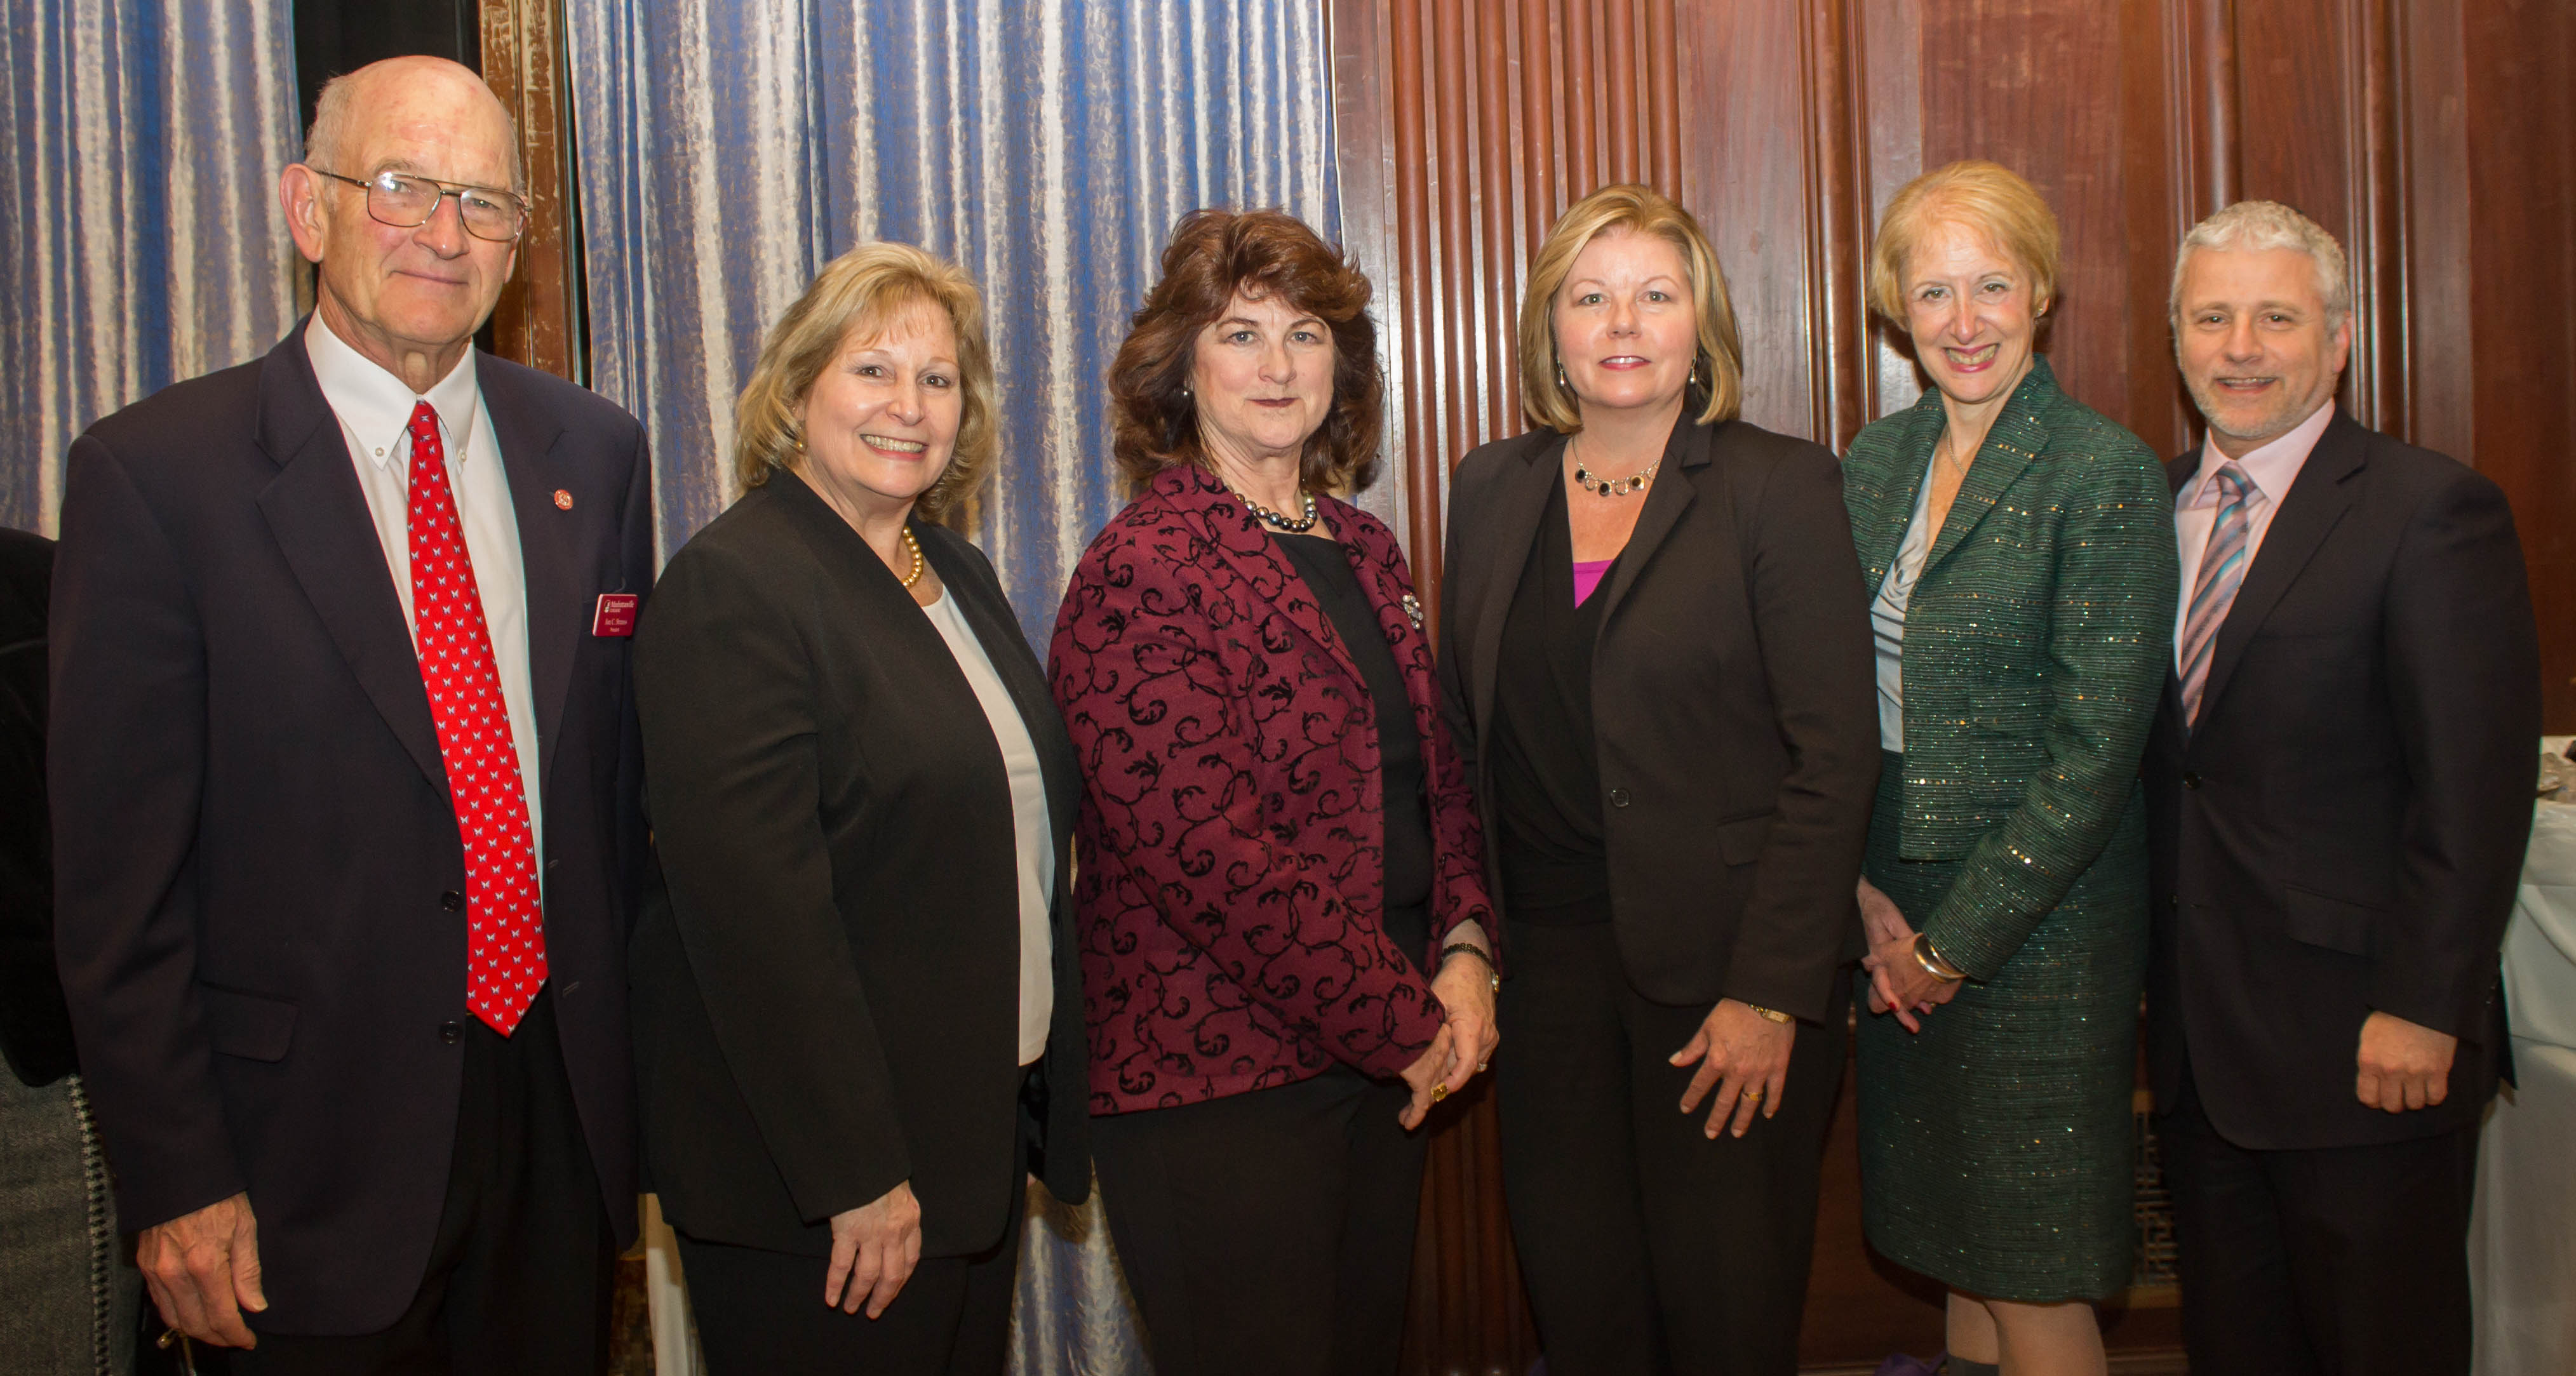 Manhattanville College President Dr. Jon Strauss; Women’s Leadership Institute Director Kathy Meany; event speakers Marcia DeWitt, Janet Hasson, and Marsha Gordon; and Dr. Anthony Davidson, dean.